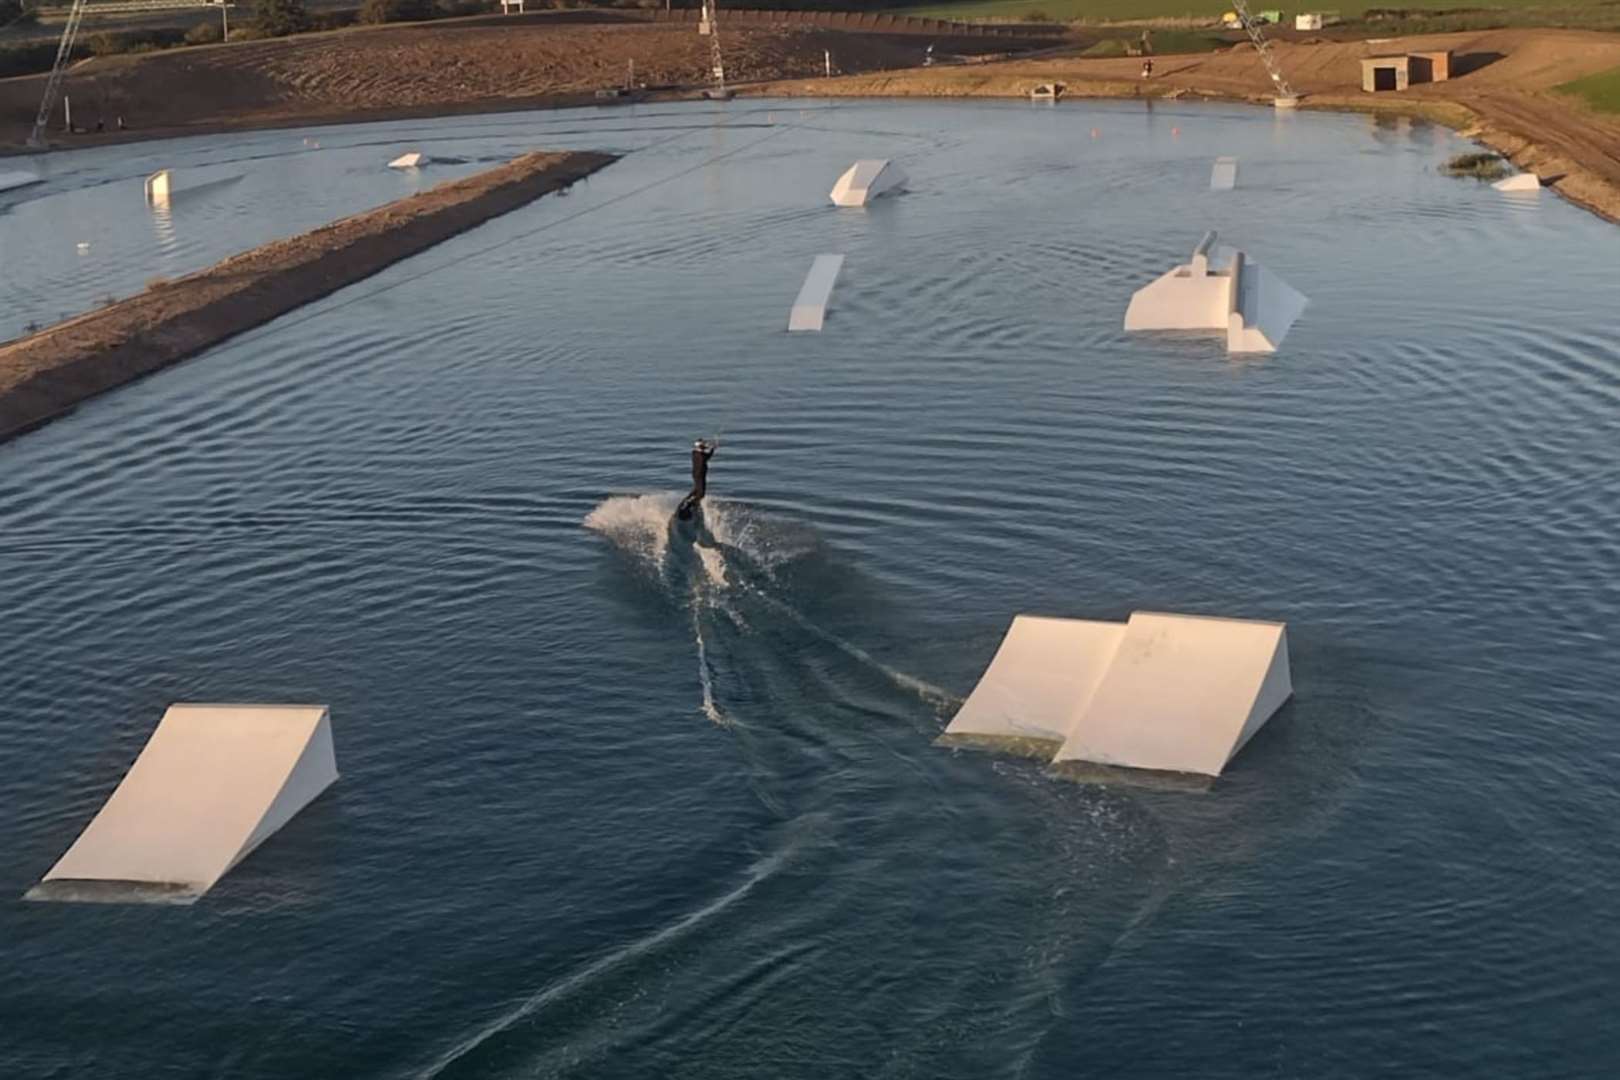 A new wakeboarding experience is opening in Sandwich today. Photo: Whitemills Wake